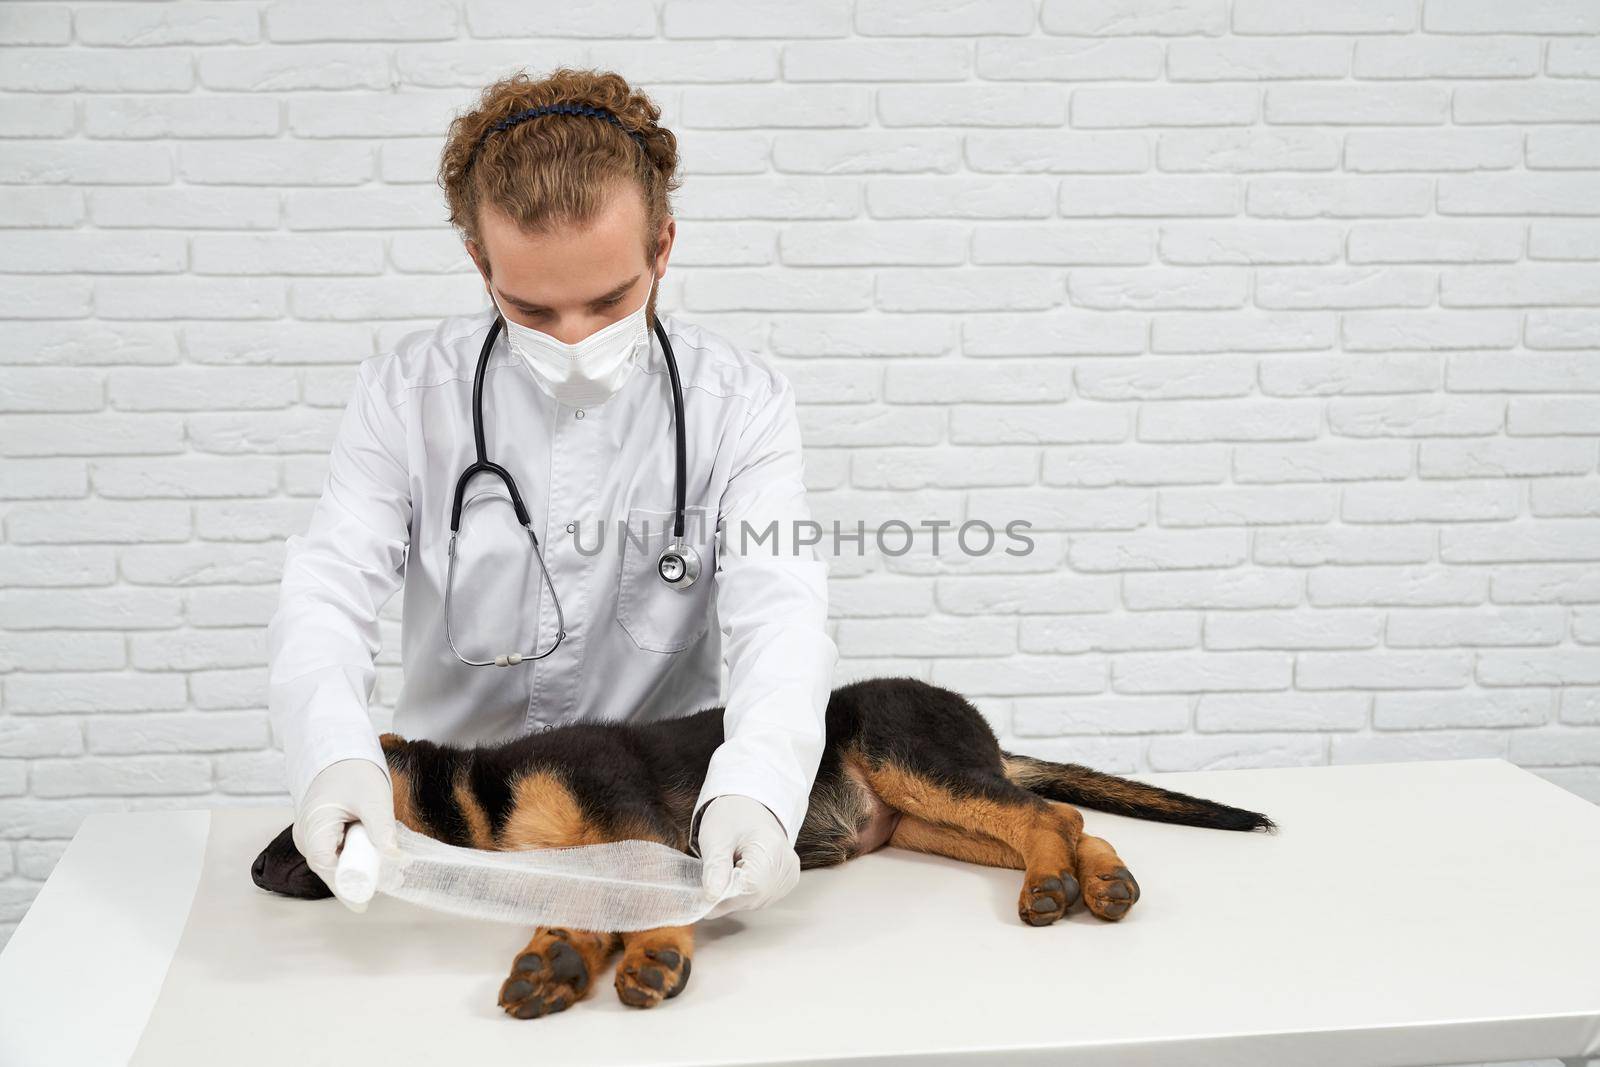 Front view of vet male holding bandage leaning over german shepherd dog before applying on wounded paw. Pedigree puppy sleeping on white table in vet clinic. Concept of pet treatment.